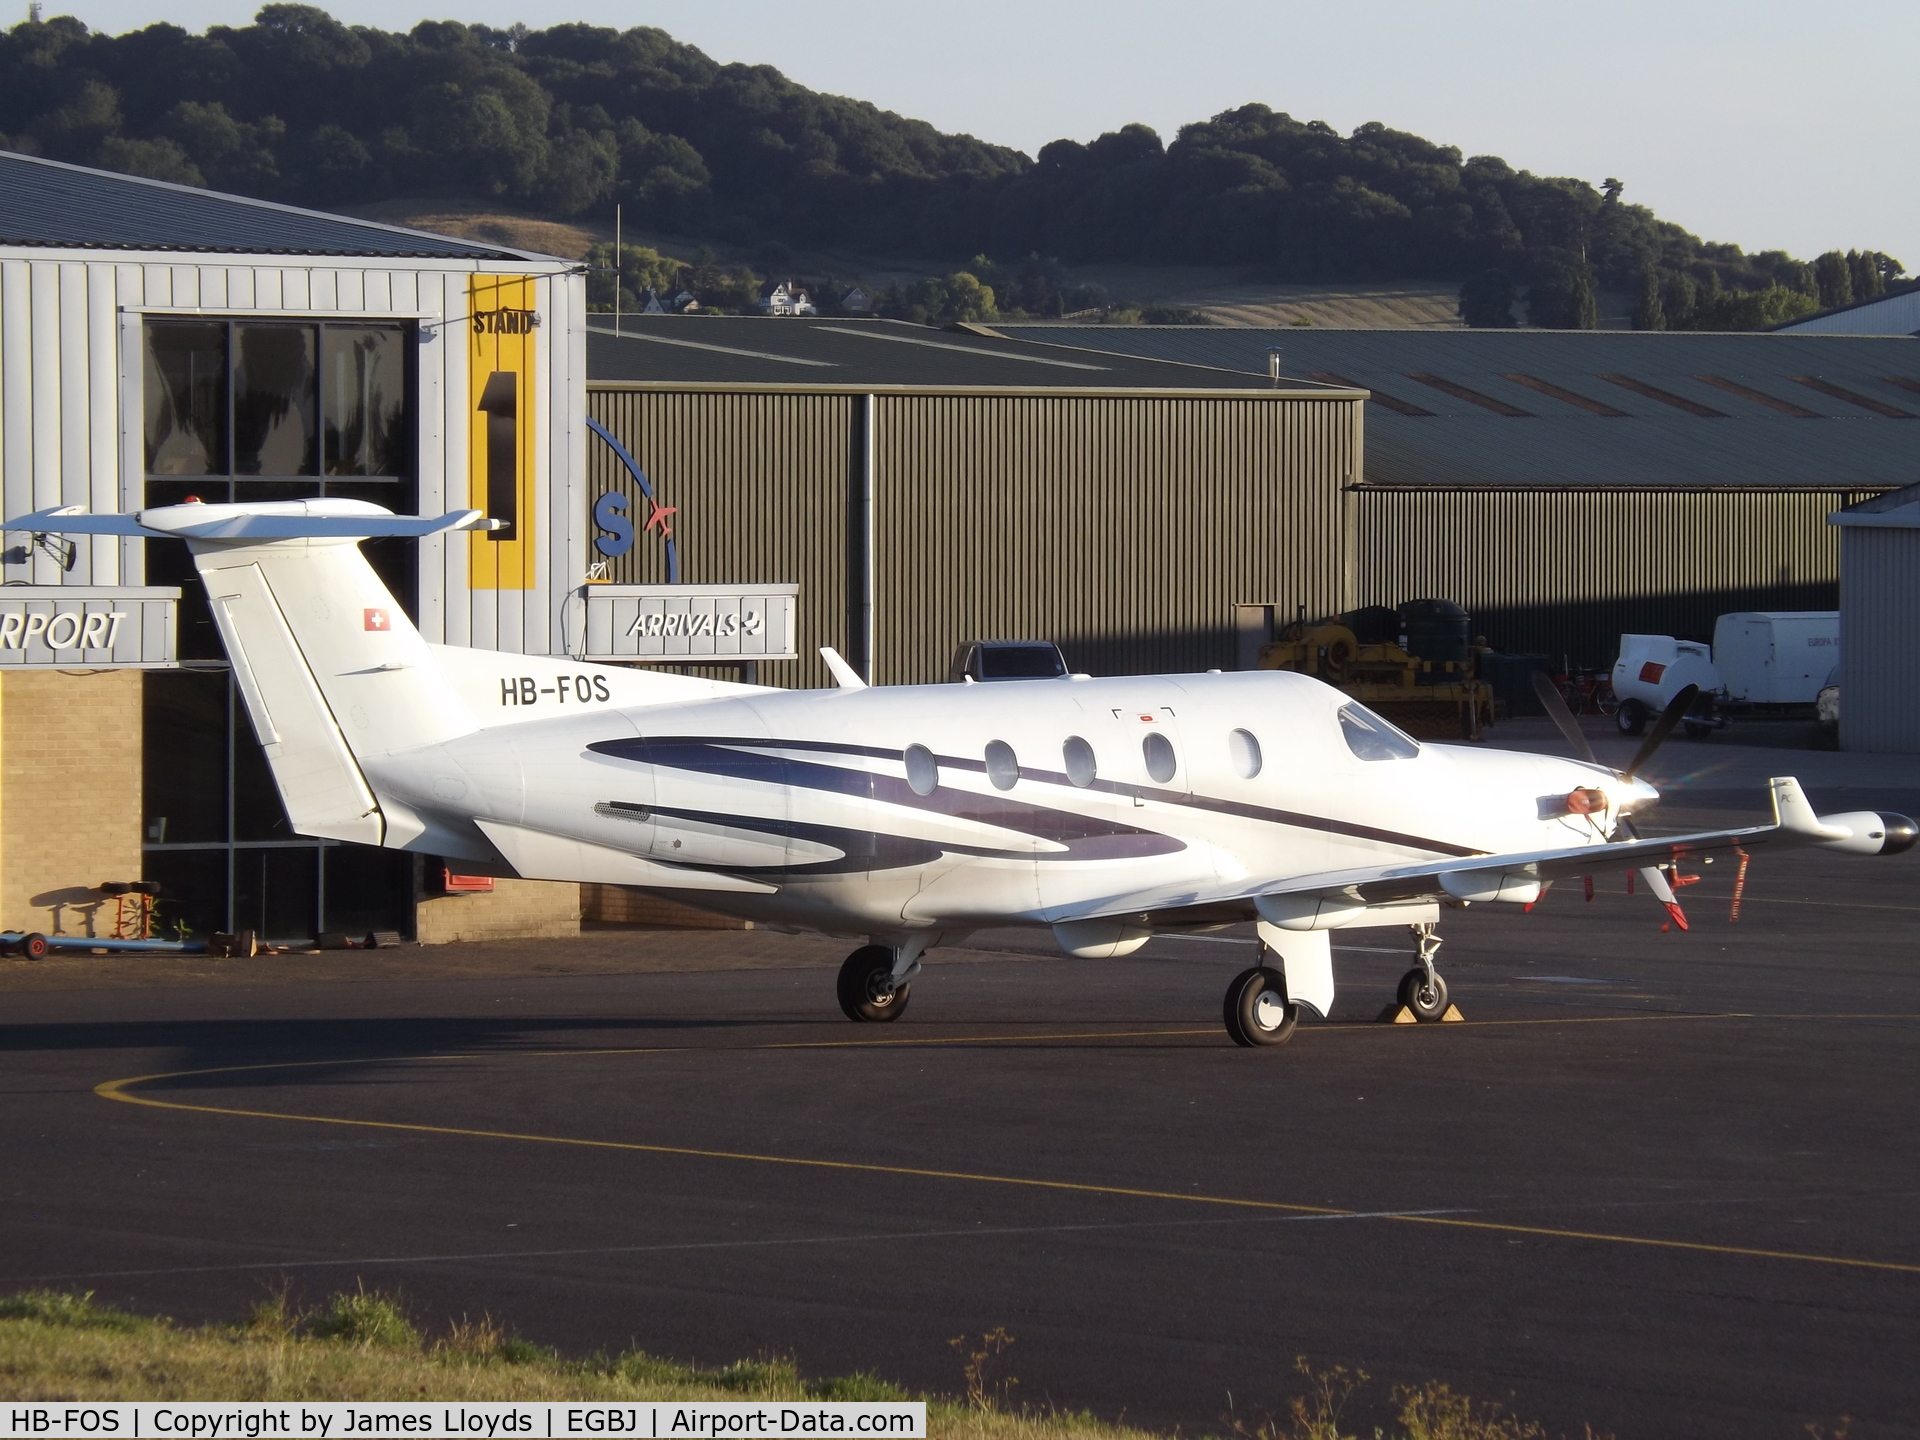 HB-FOS, 2000 Pilatus PC-12/45 C/N 366, Parked up at Gloucestershire Airport.